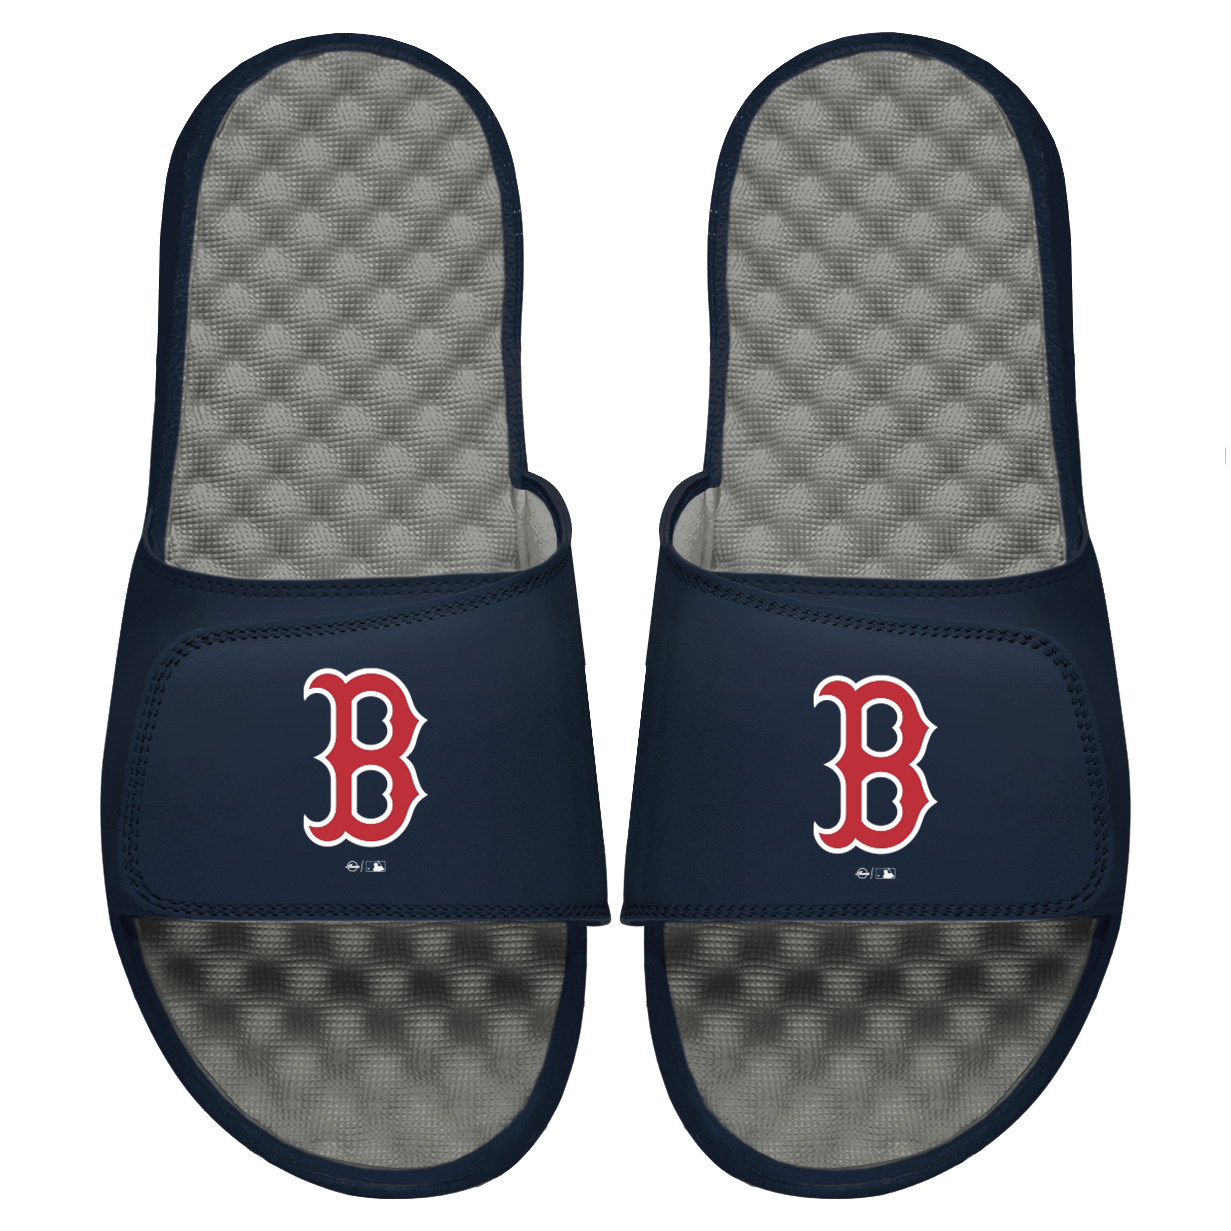 Islides Official - Boston Red Sox Primary Pink 8 / Pink Slides - Sandals - Slippers